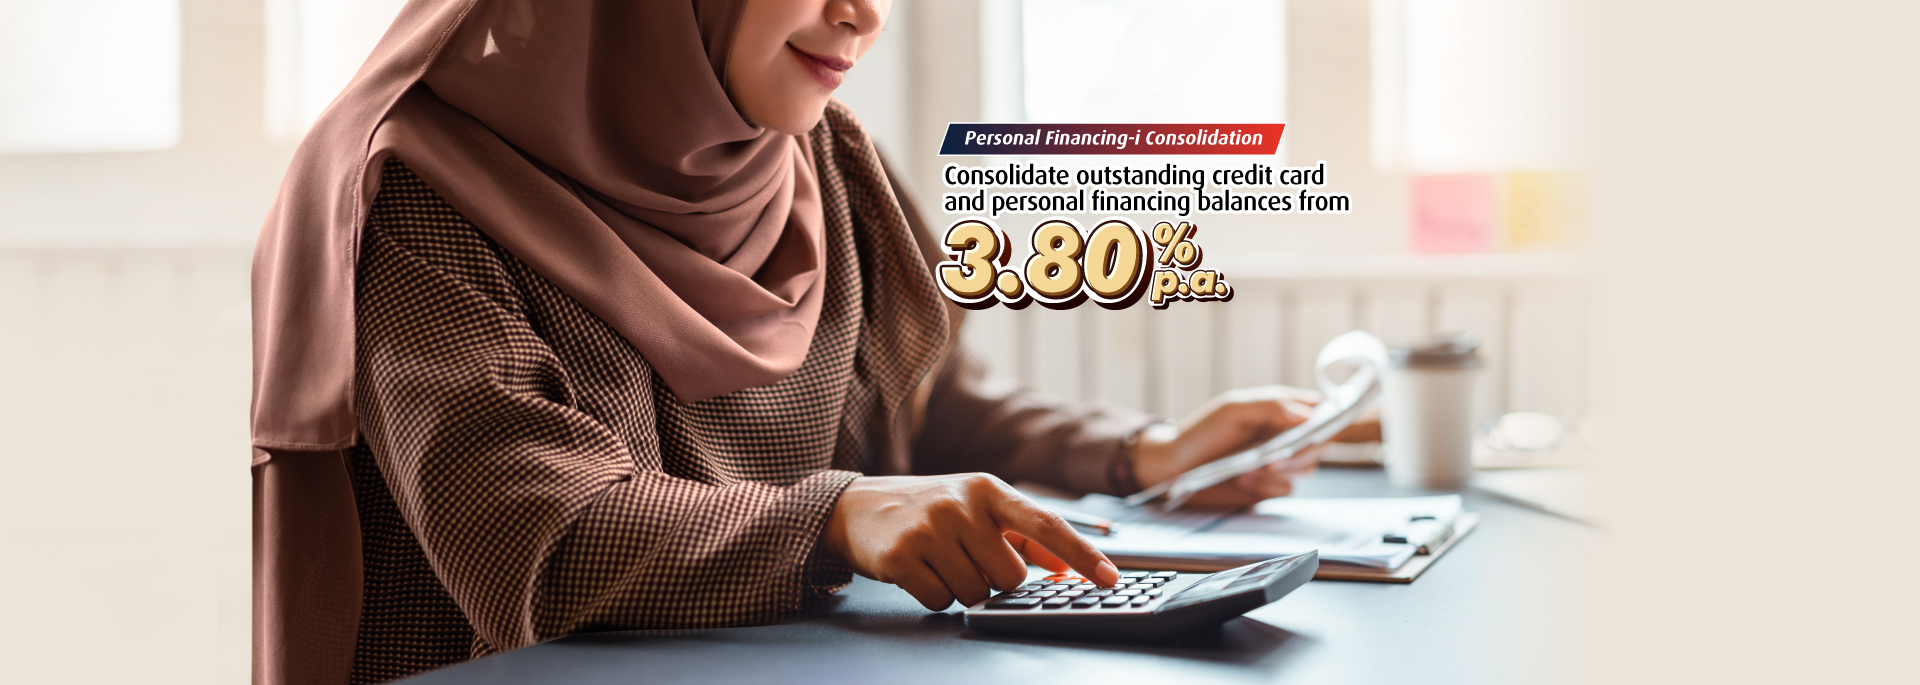 Consolidate and pay off outstanding balances from 3.60% p.a.*